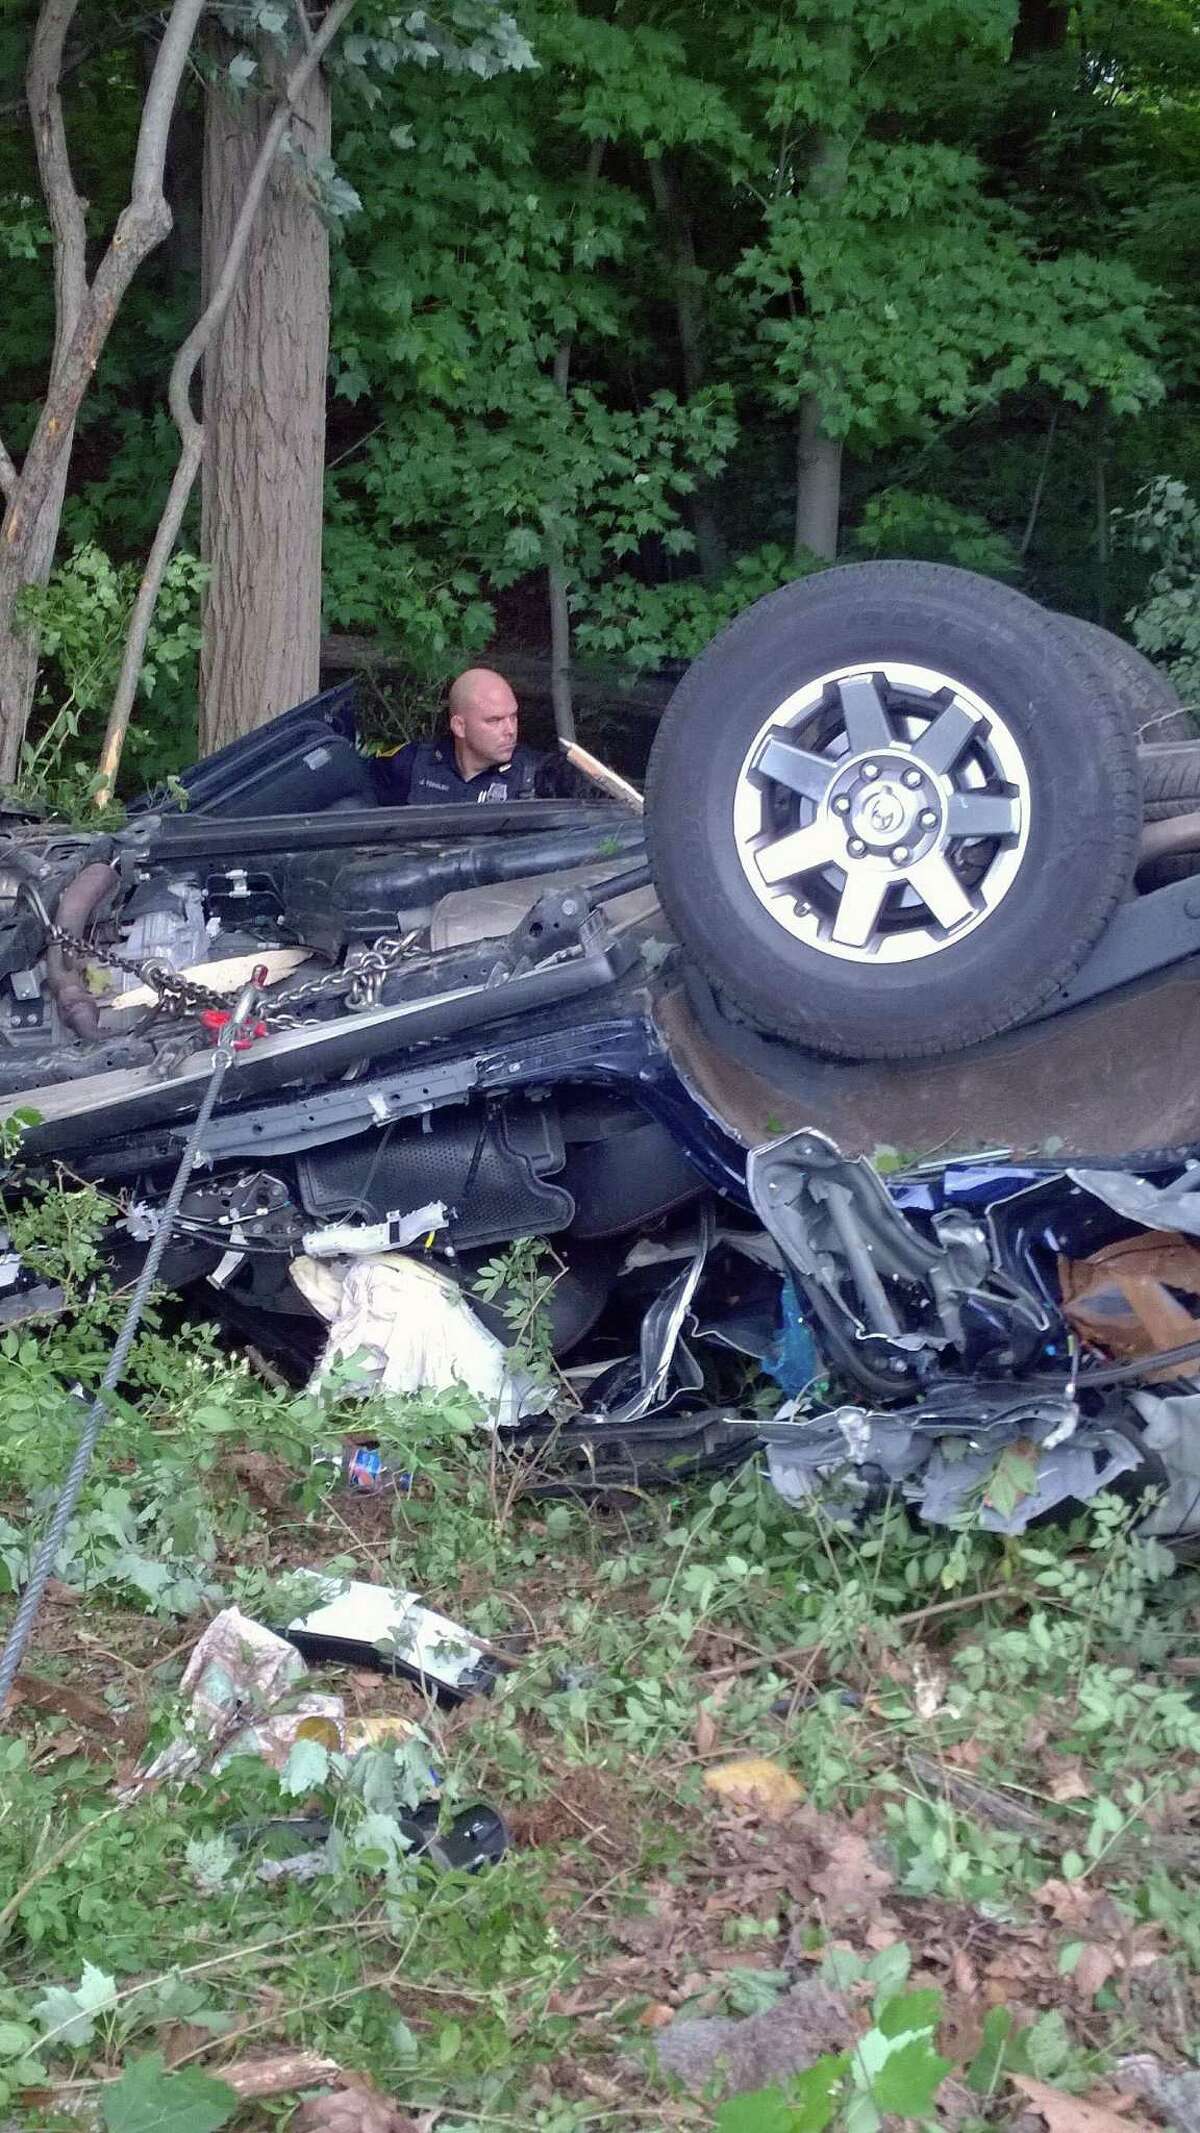 Connecticut car impaled by guardrail leaves only minor injuries